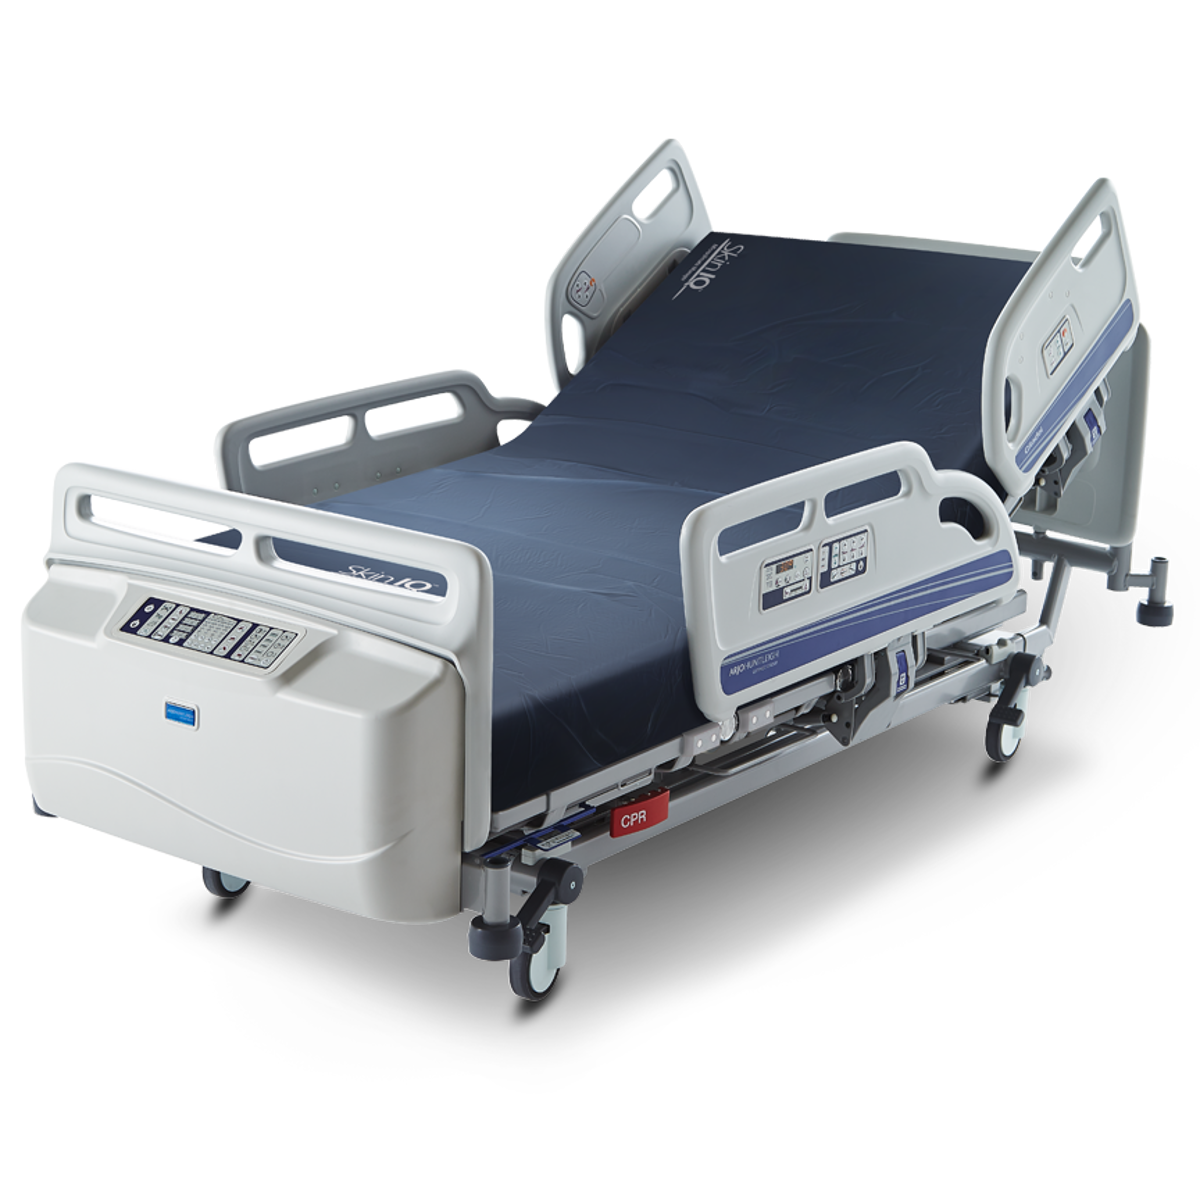 ArjoHuntleigh-Products-Medical-Beds-Hospital-Beds-Citadel-Patient-Care-System.png